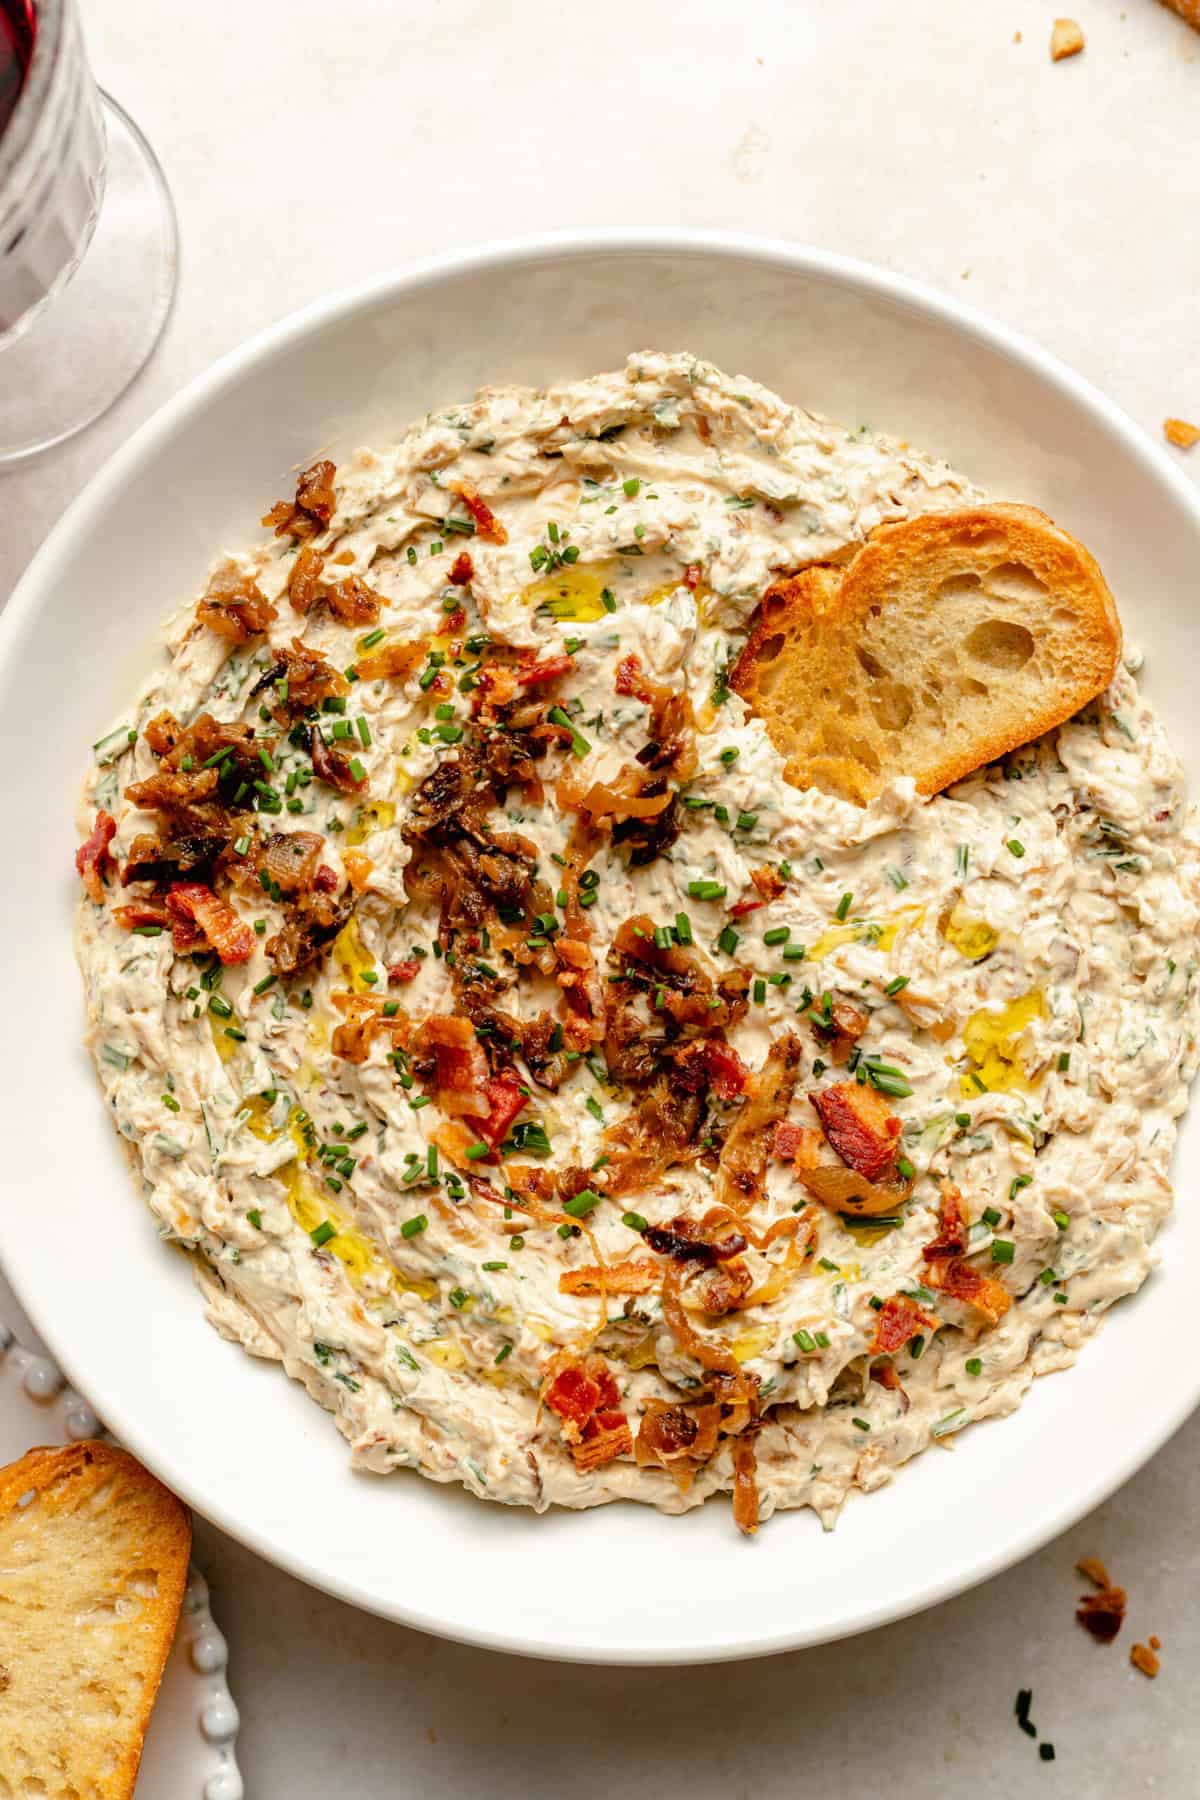 Dairy-Free French Onion Dip